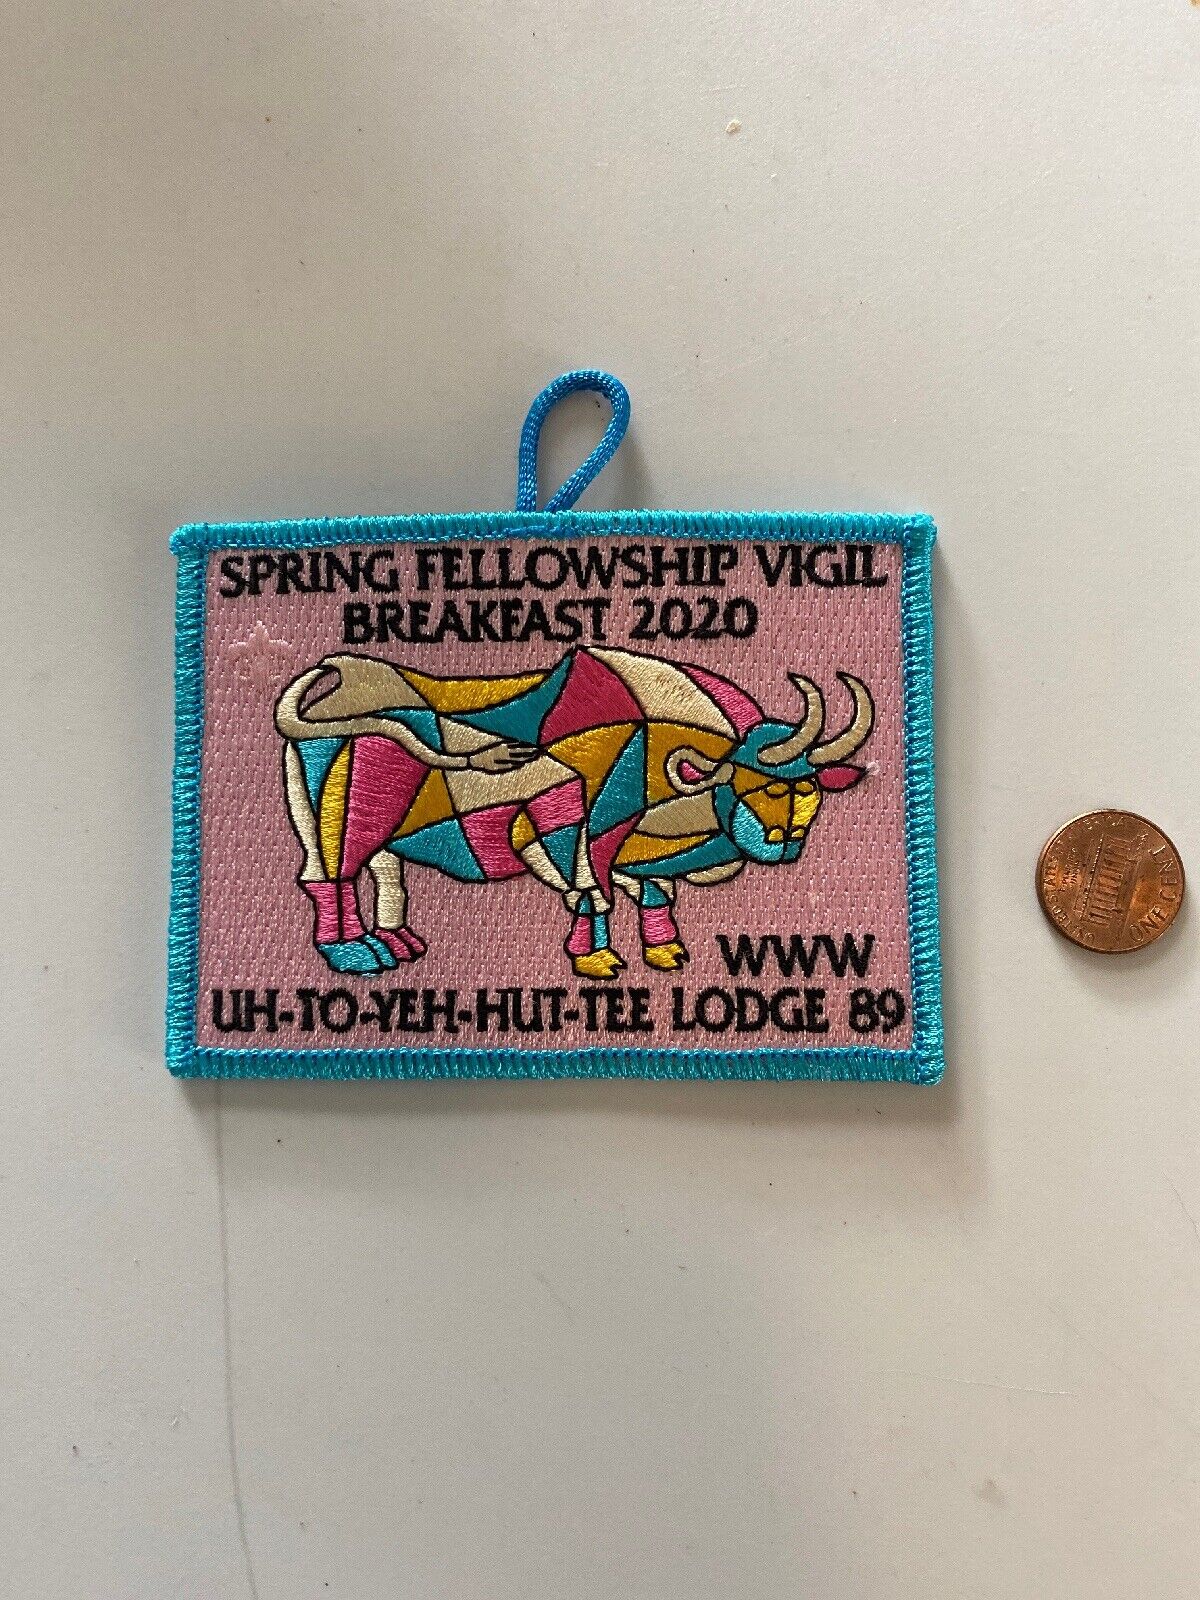 Uh To Yeh Hut Tee Lodge #89 2020 Vigil Breakfast Patch 38D-261E